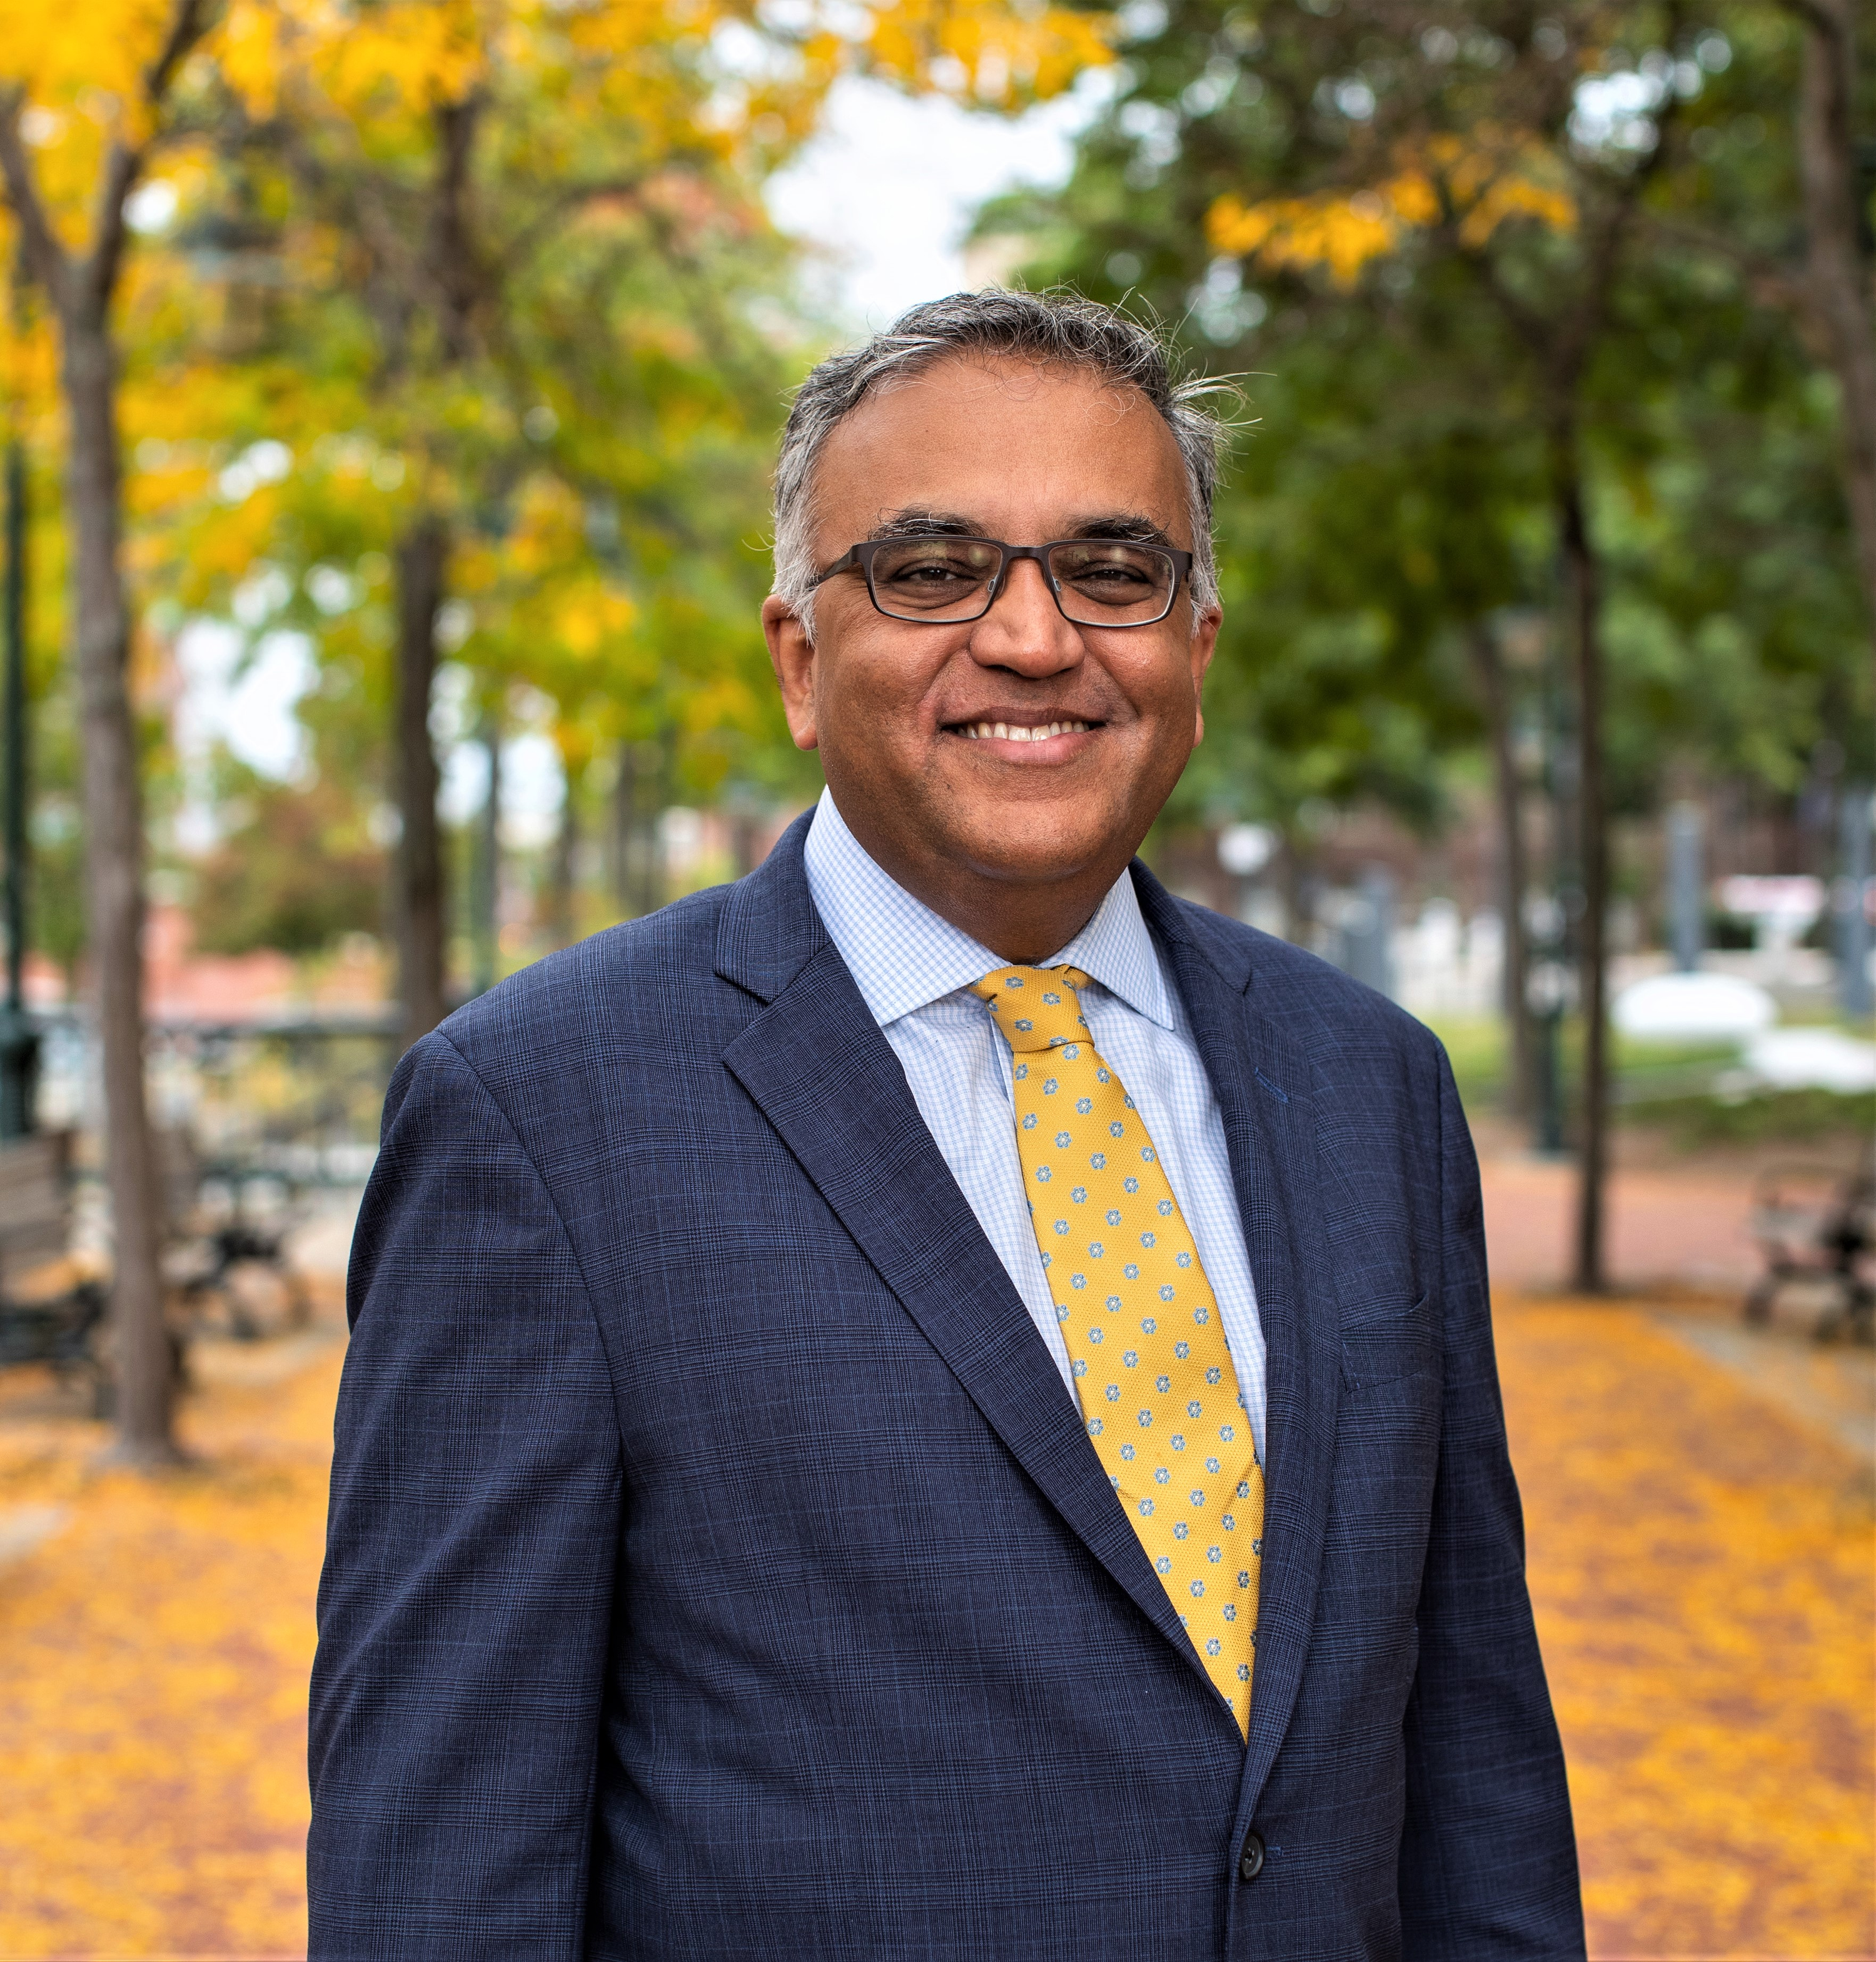 Welcome to Episode 34 of “COVID: What comes next,” an exclusive weekly Providence Journal/USA TODAY NETWORK podcast featuring Dr. Ashish Jha, dean of the Brown University School of Public Health and an internationally respected expert on pandemic response and preparedness